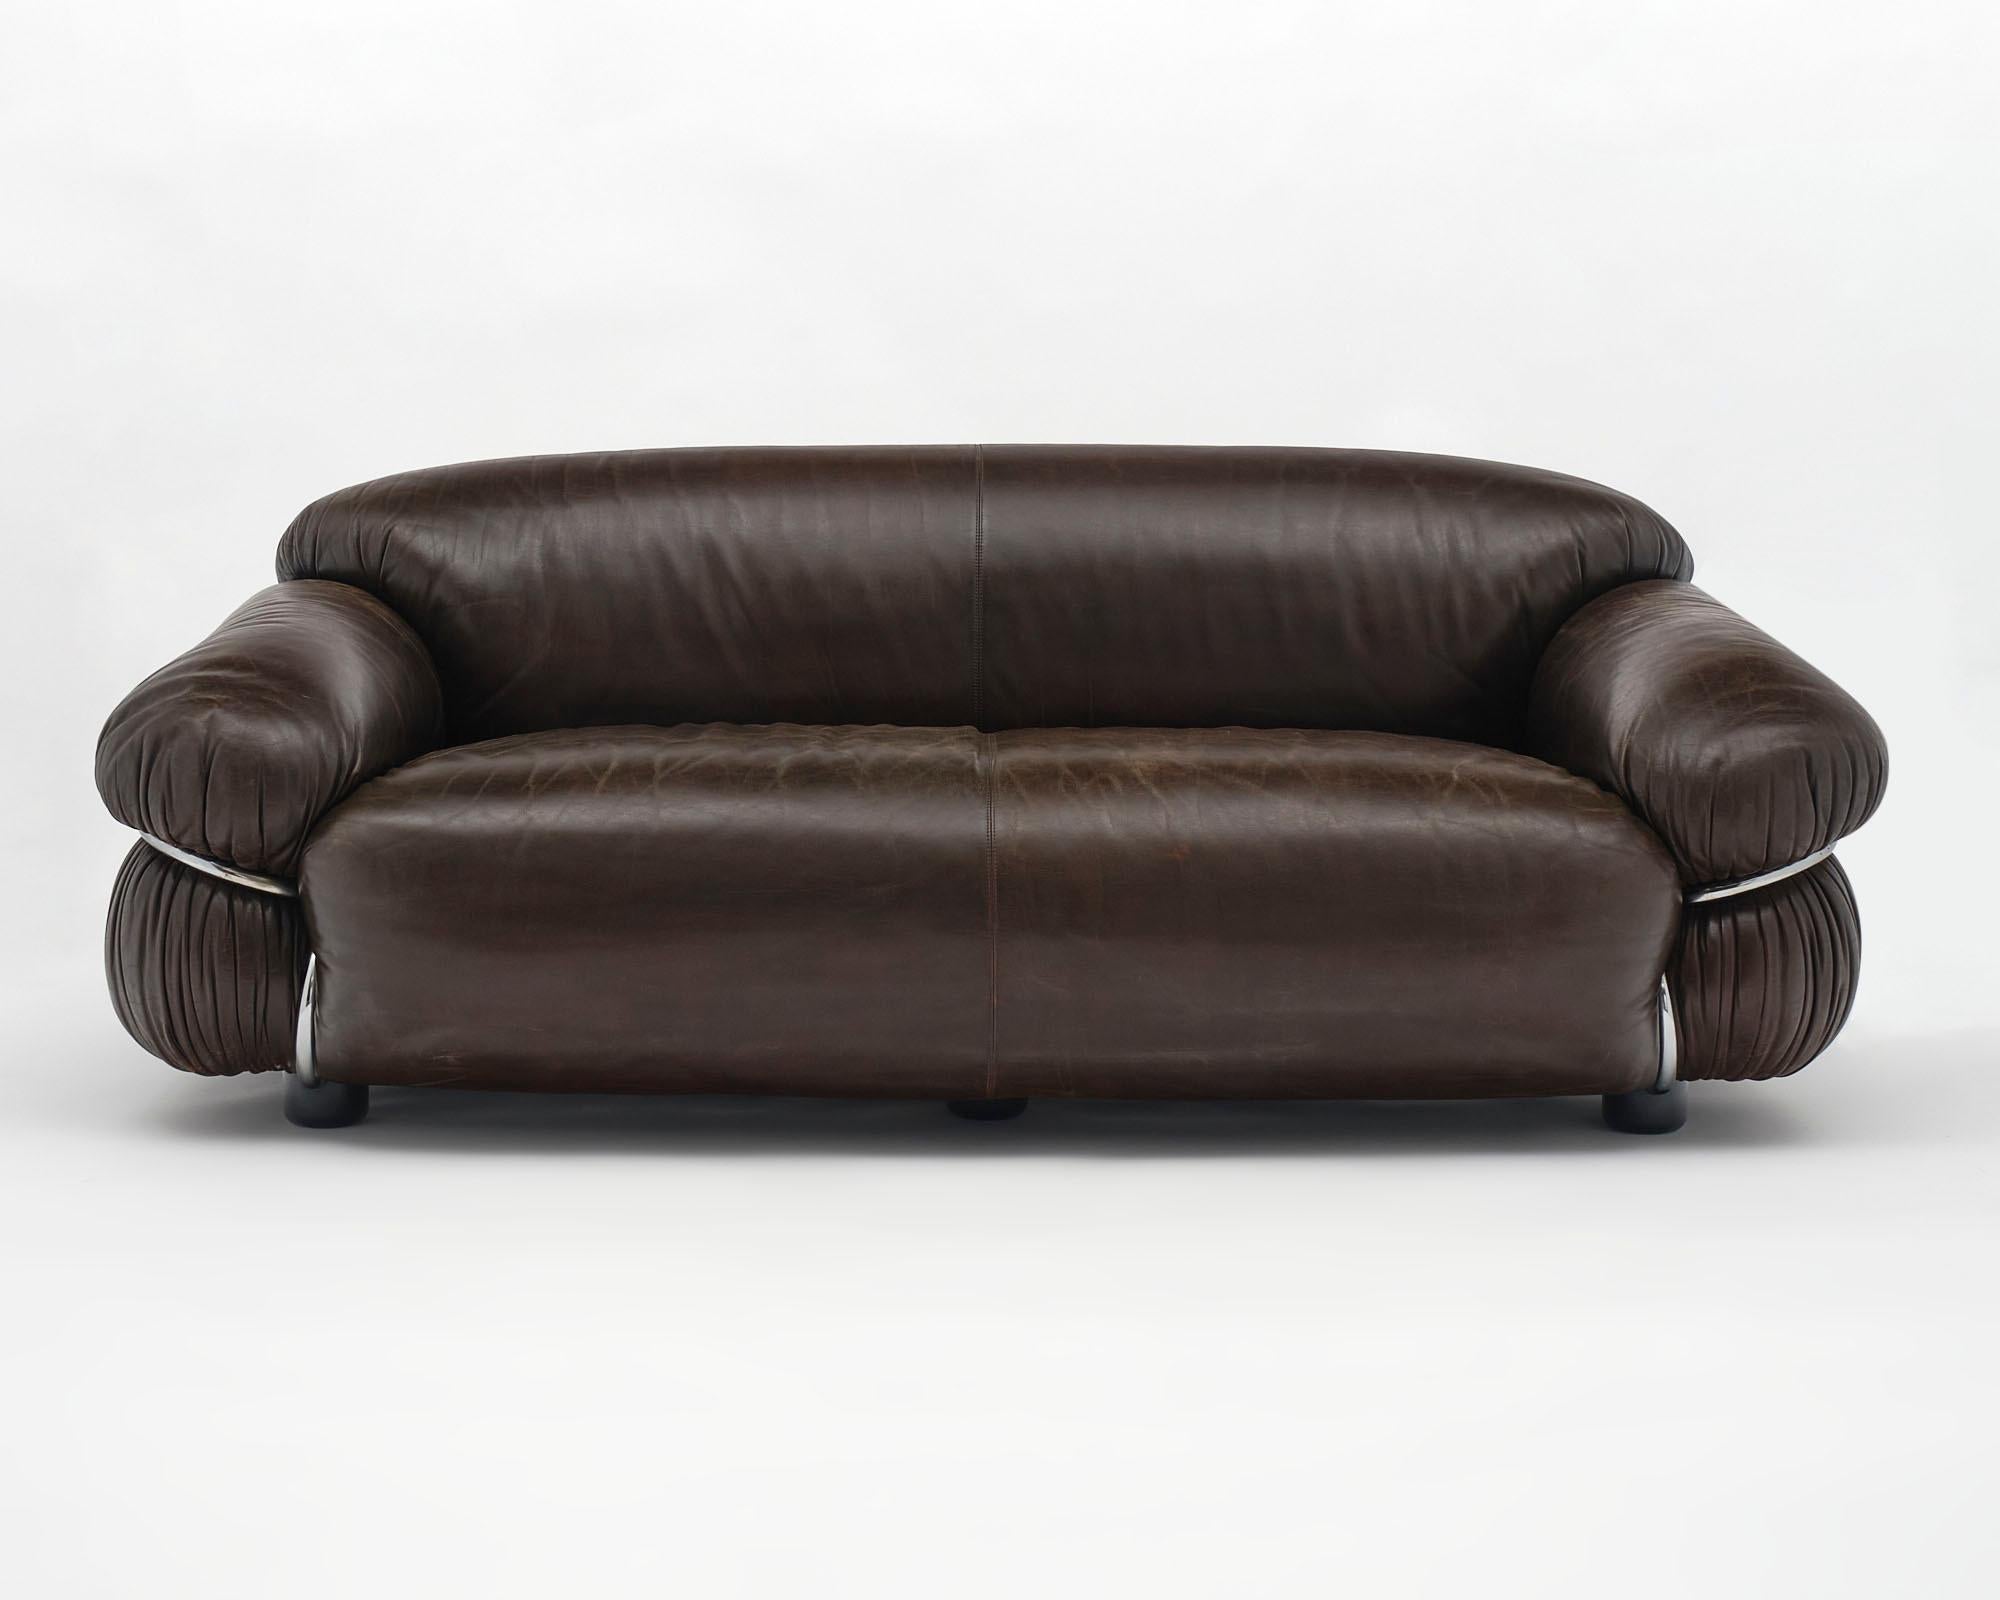 Pair of sofas, Italian, by Gianfranco Frattini and designed for Cassina. The supple leather, in great condition, lends itself to the voluptuous form. These sofas rest in a bent tubular chromed structure that are both in great condition.